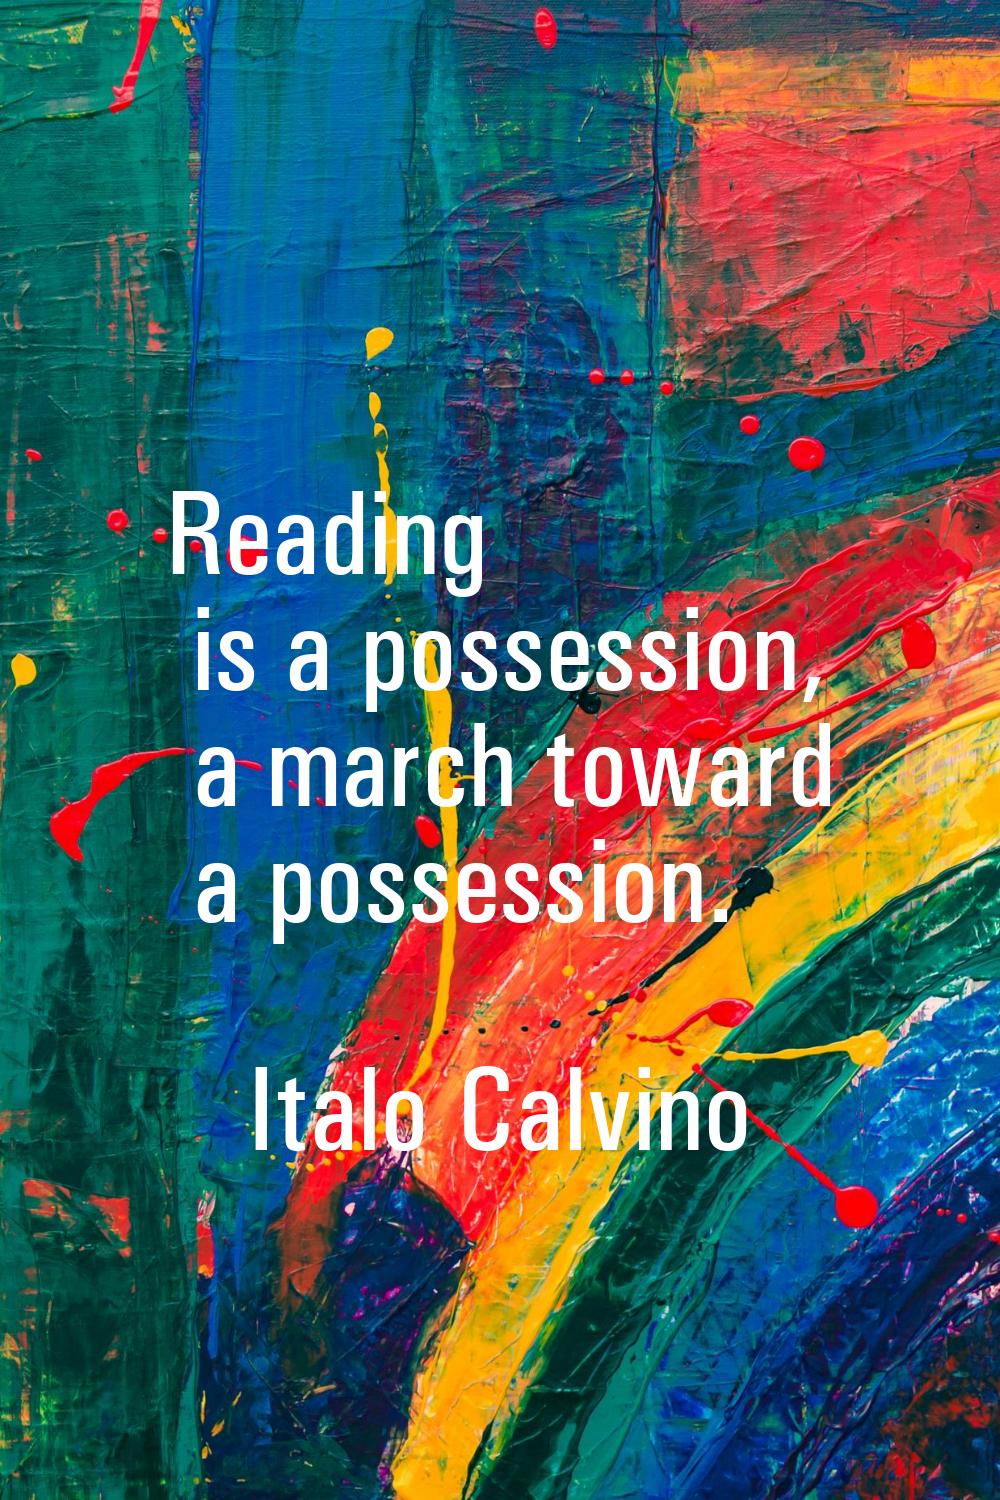 Reading is a possession, a march toward a possession.